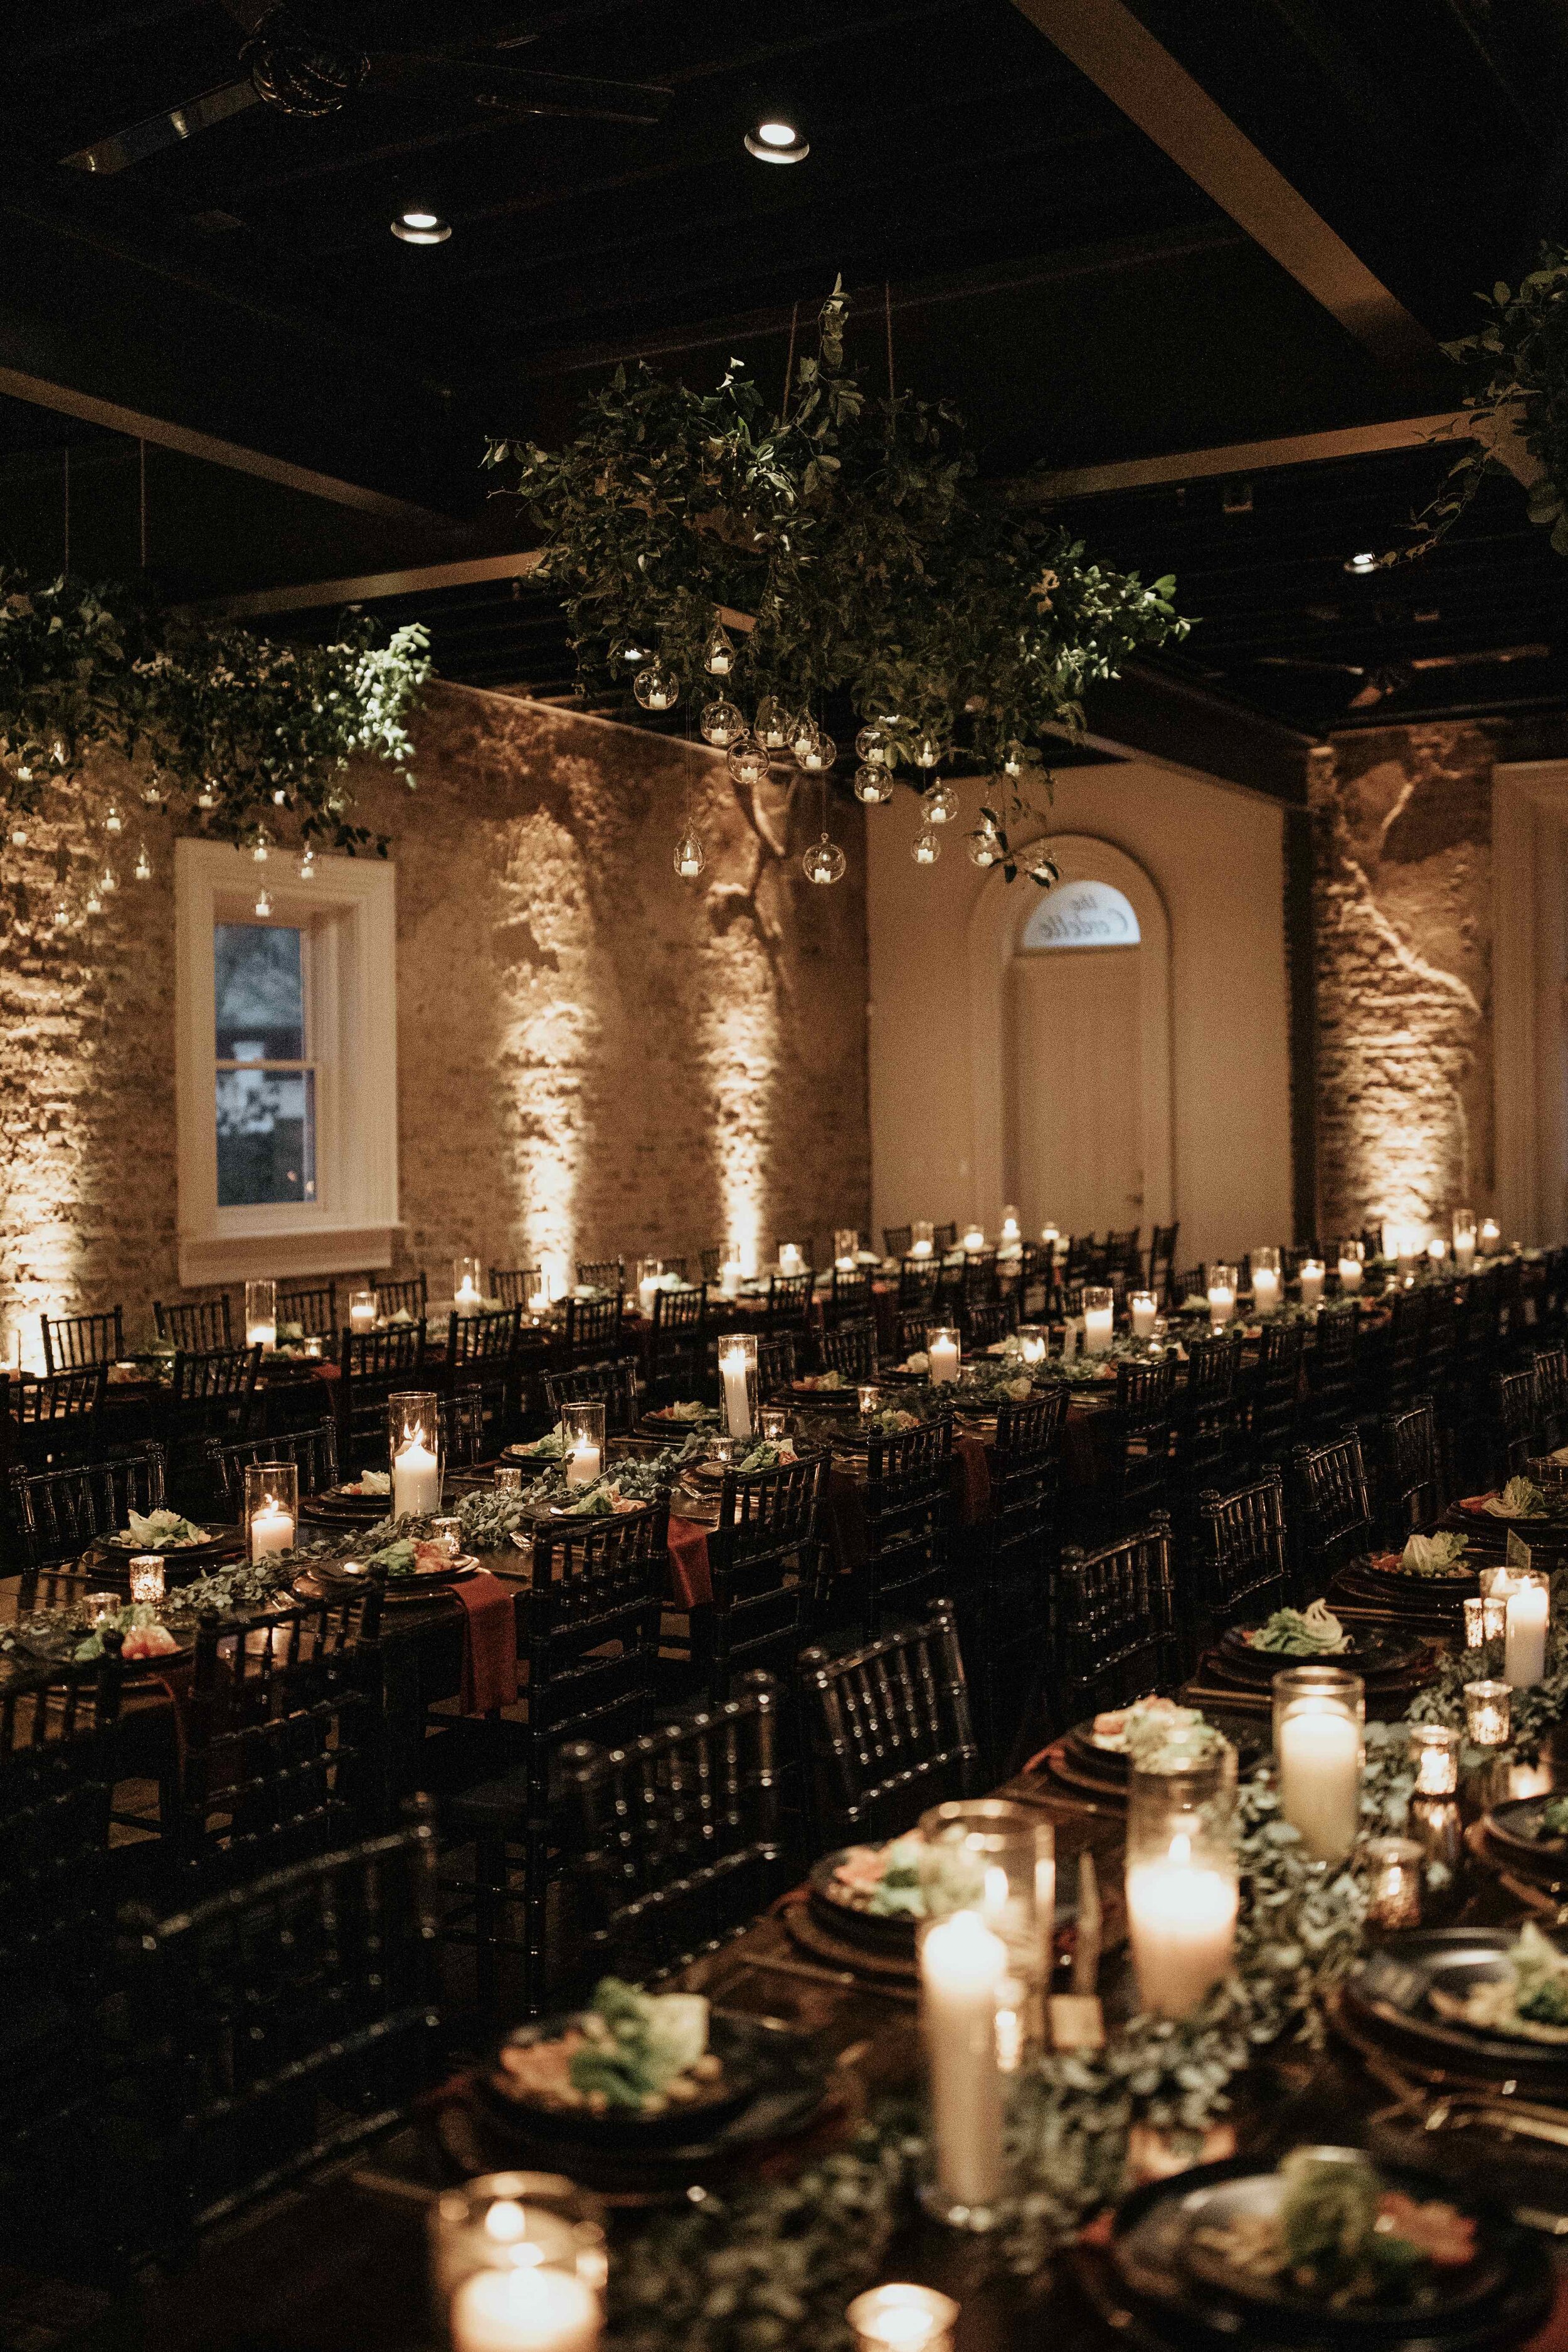 Hanging terrarium candle installation with lush greenery. Nashville wedding floral design at the Cordelle.